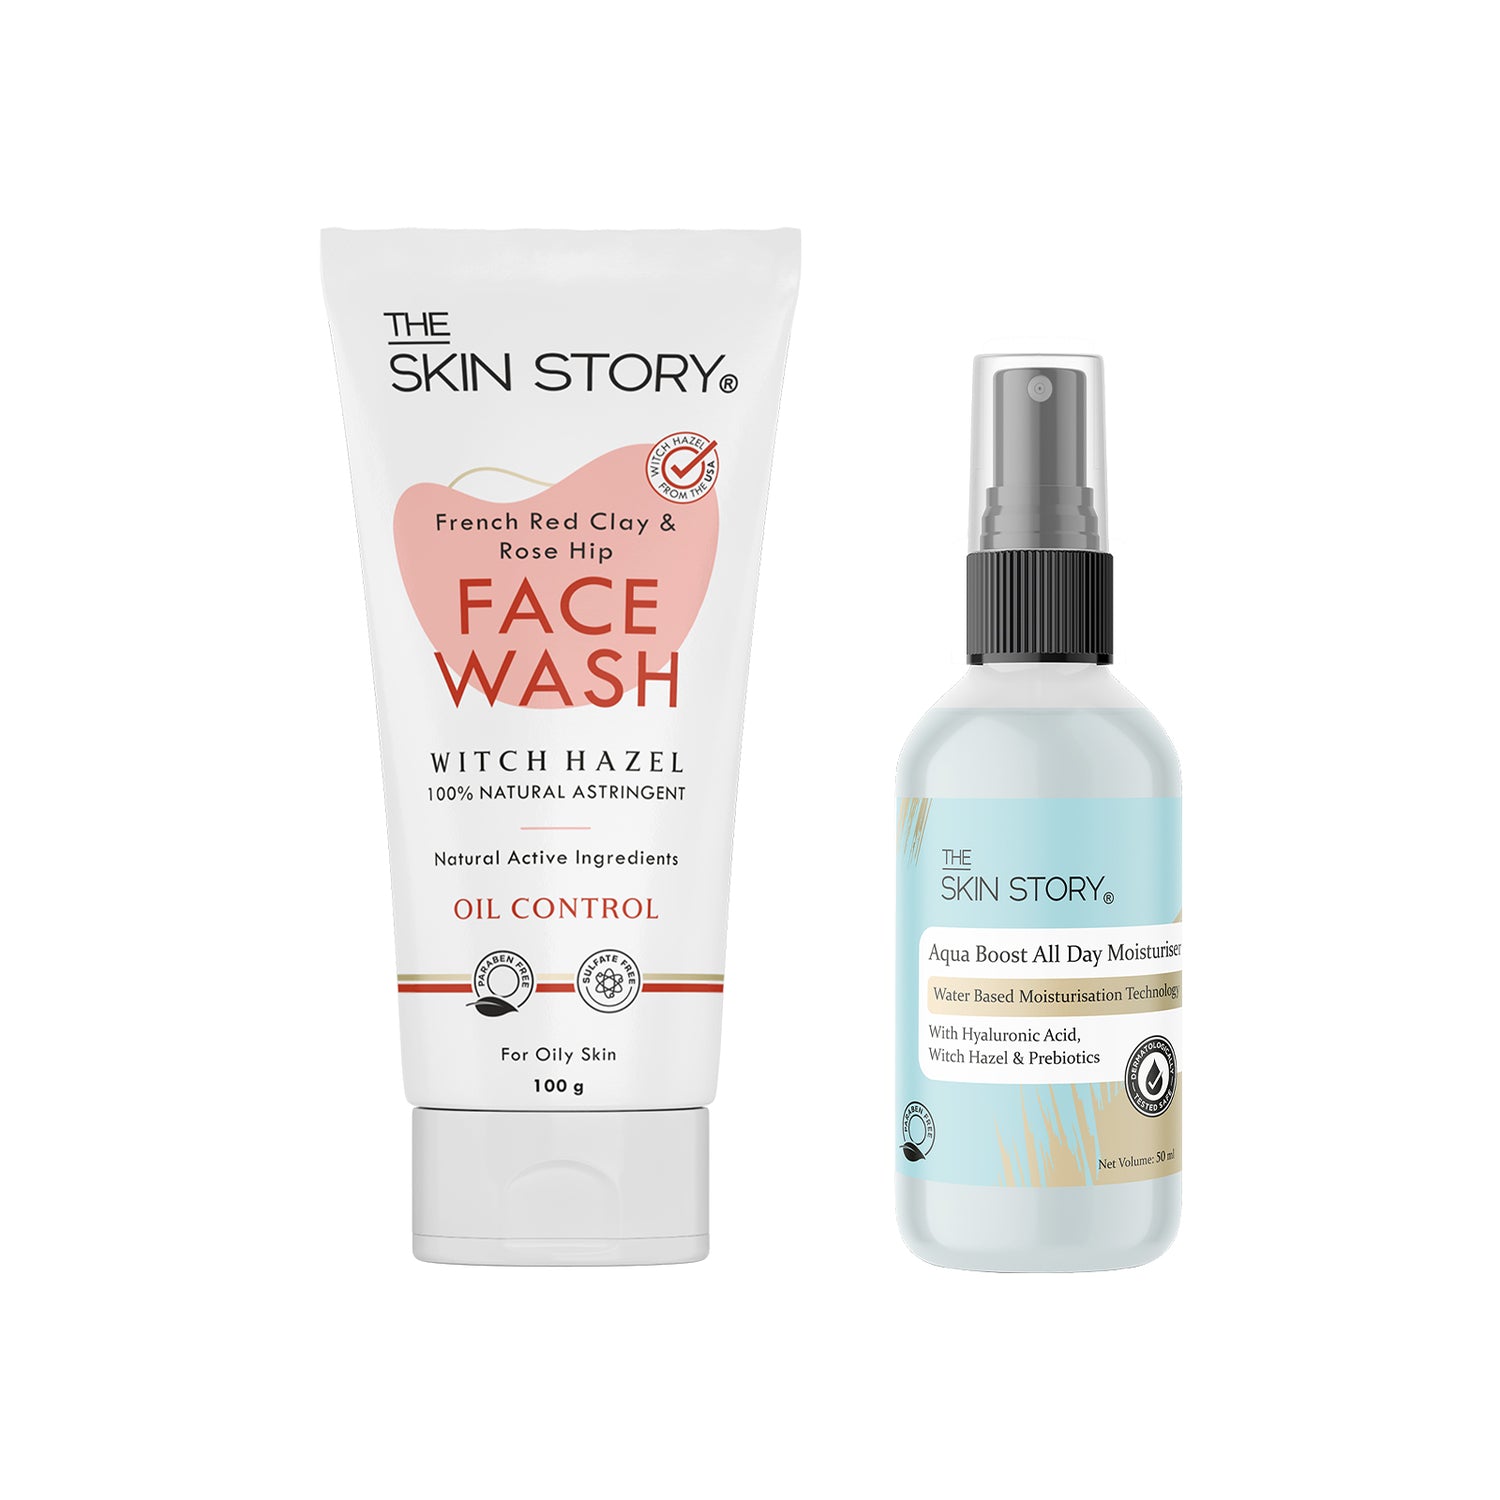 The Skin Story French Red Clay &amp; Rose Hip Facewash, 100g + The Skin Story Aqua Boost All Day Moisturiser, 50ml